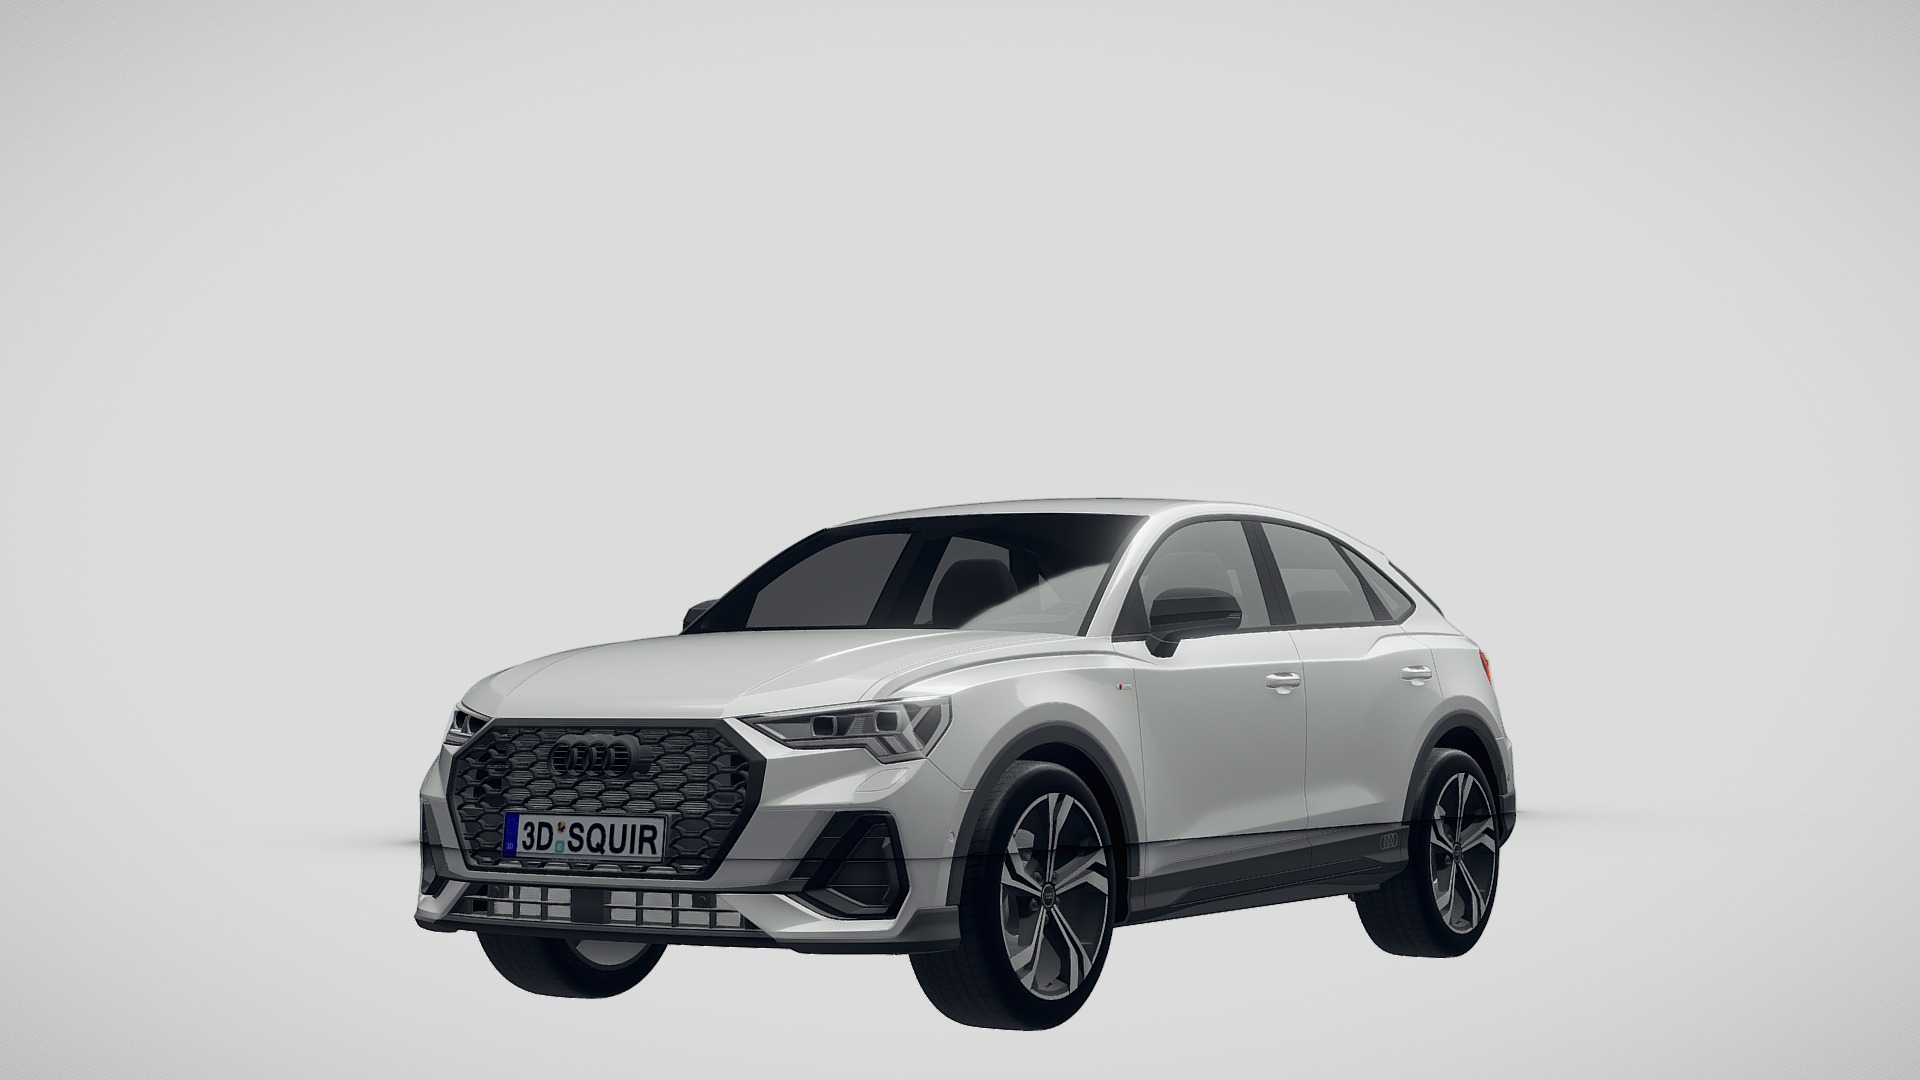 3D model Audi Q3 Sportback 2020 - This is a 3D model of the Audi Q3 Sportback 2020. The 3D model is about a white car with a black background.